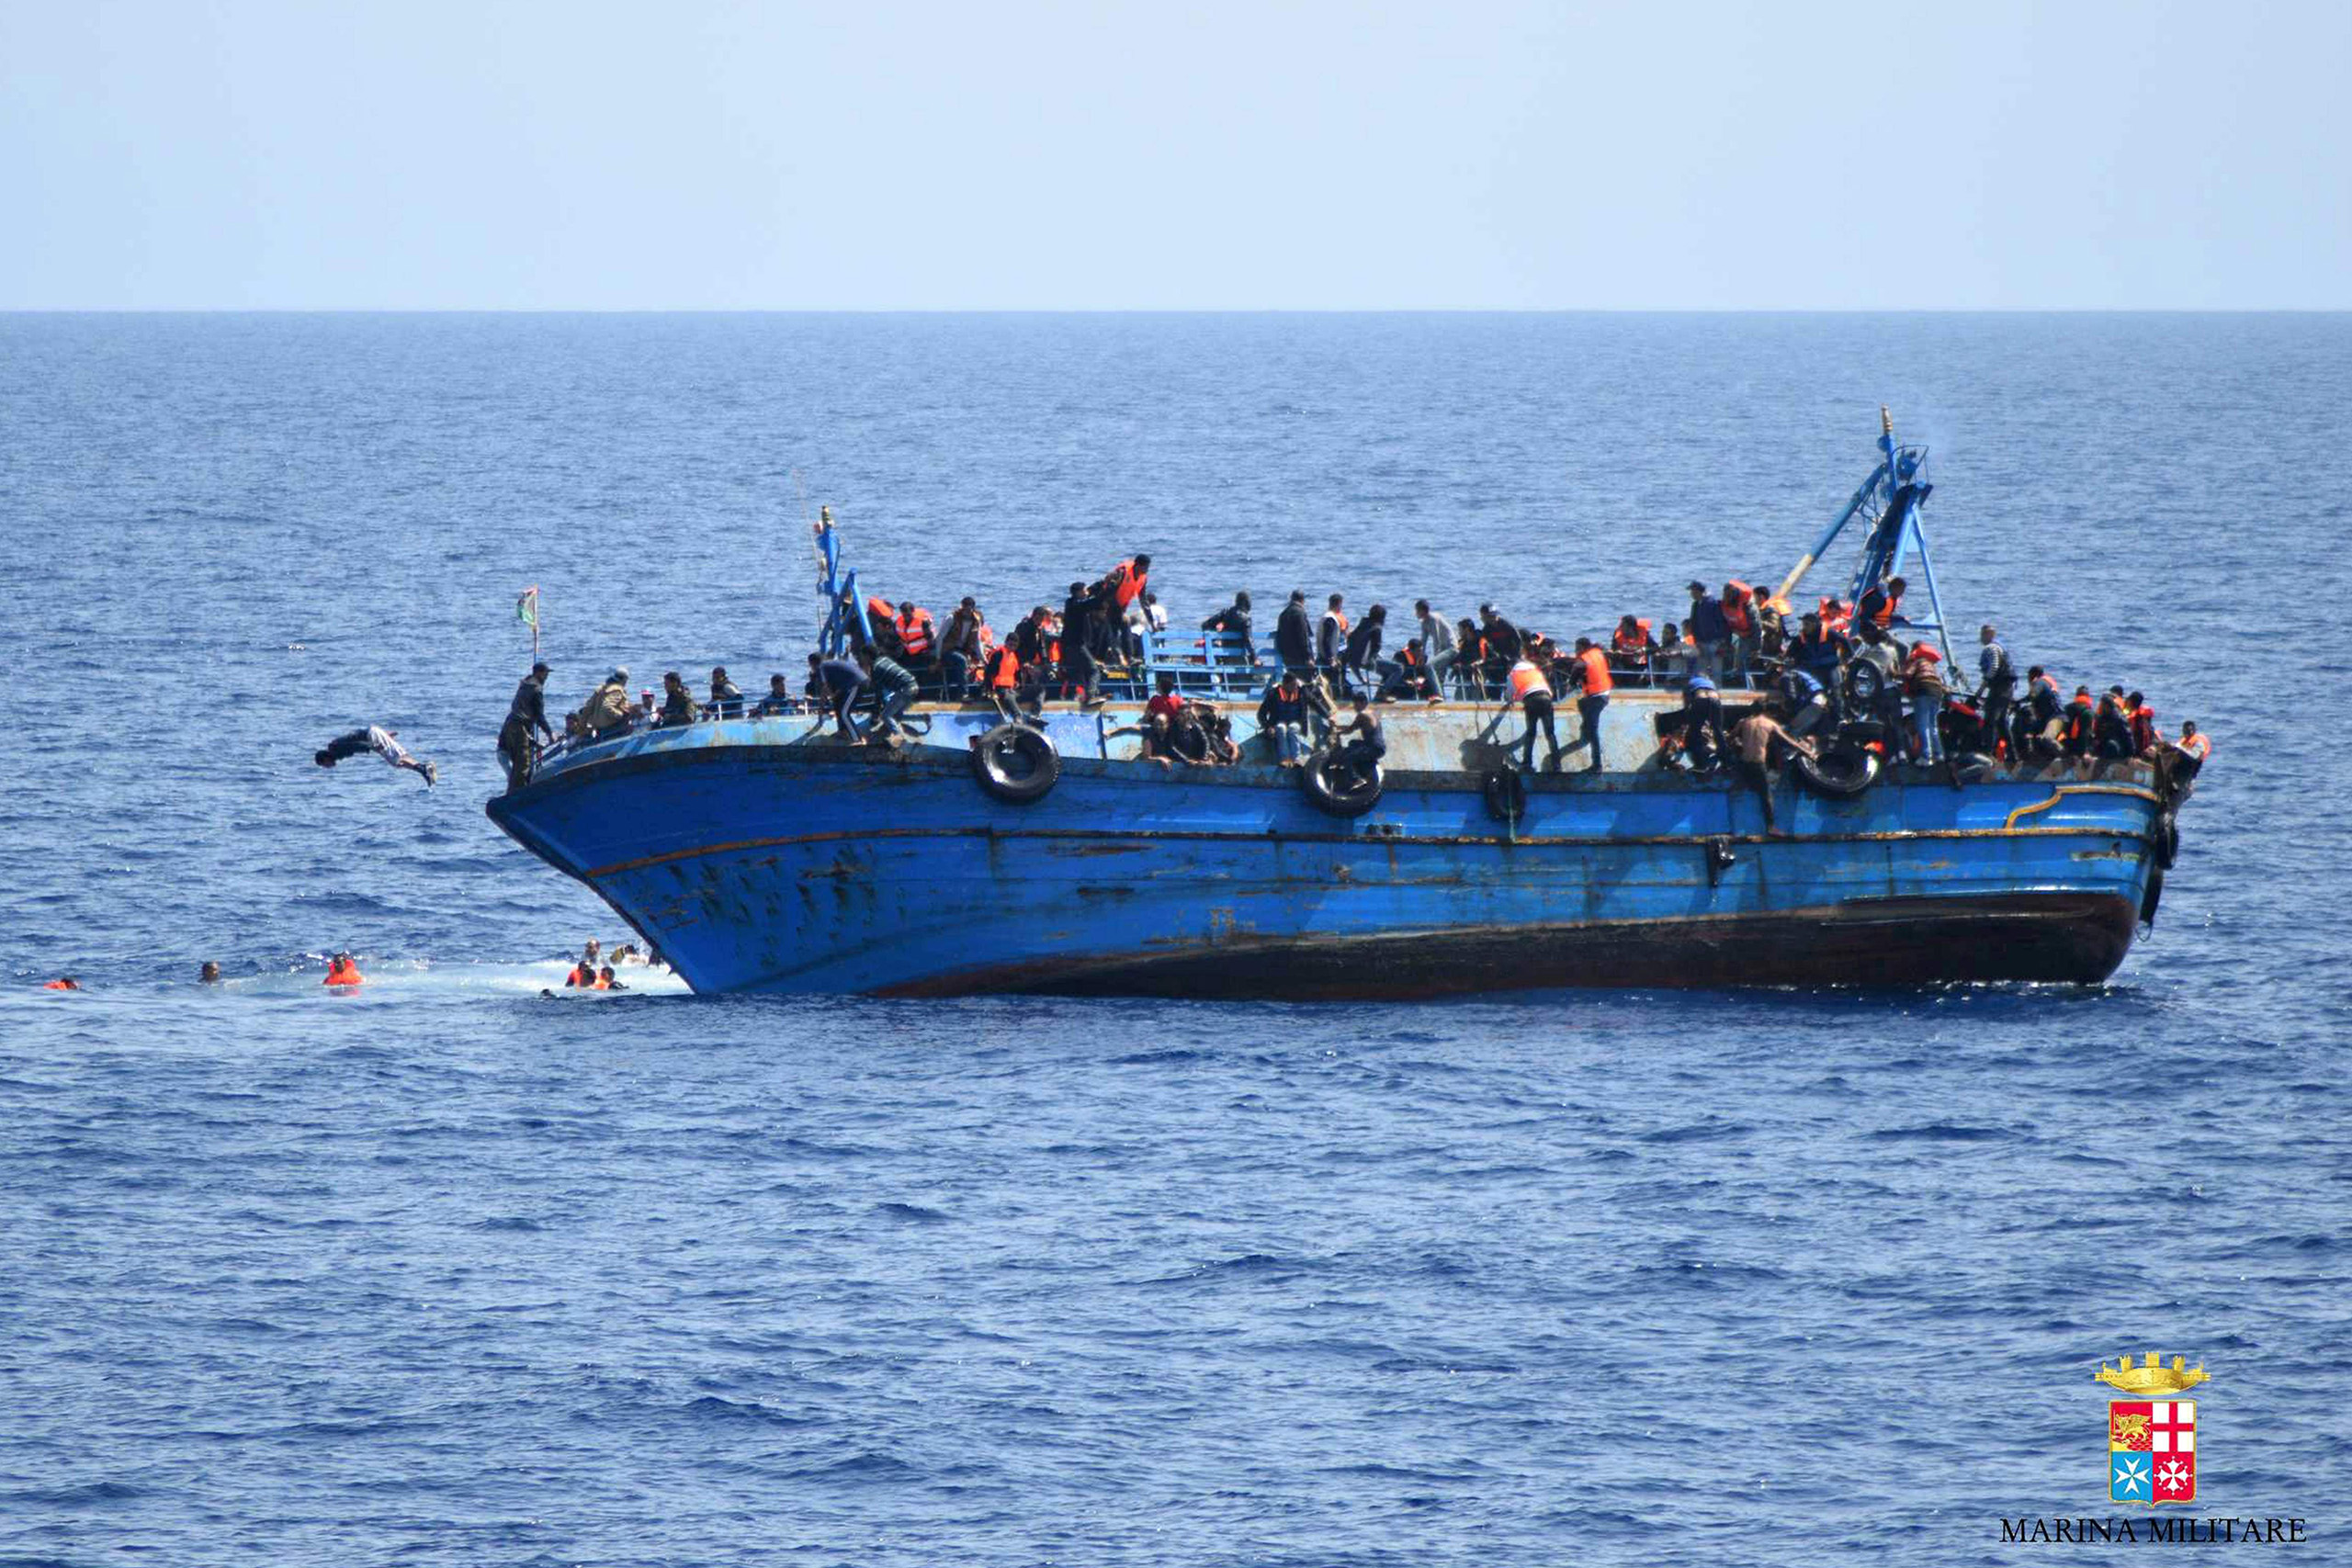 The navy's Bettica patrol boat spotted "a boat in precarious conditions off the coast of Libya with numerous migrants aboard," it said in a statement. (Italian Navy/AFP/Getty Images)